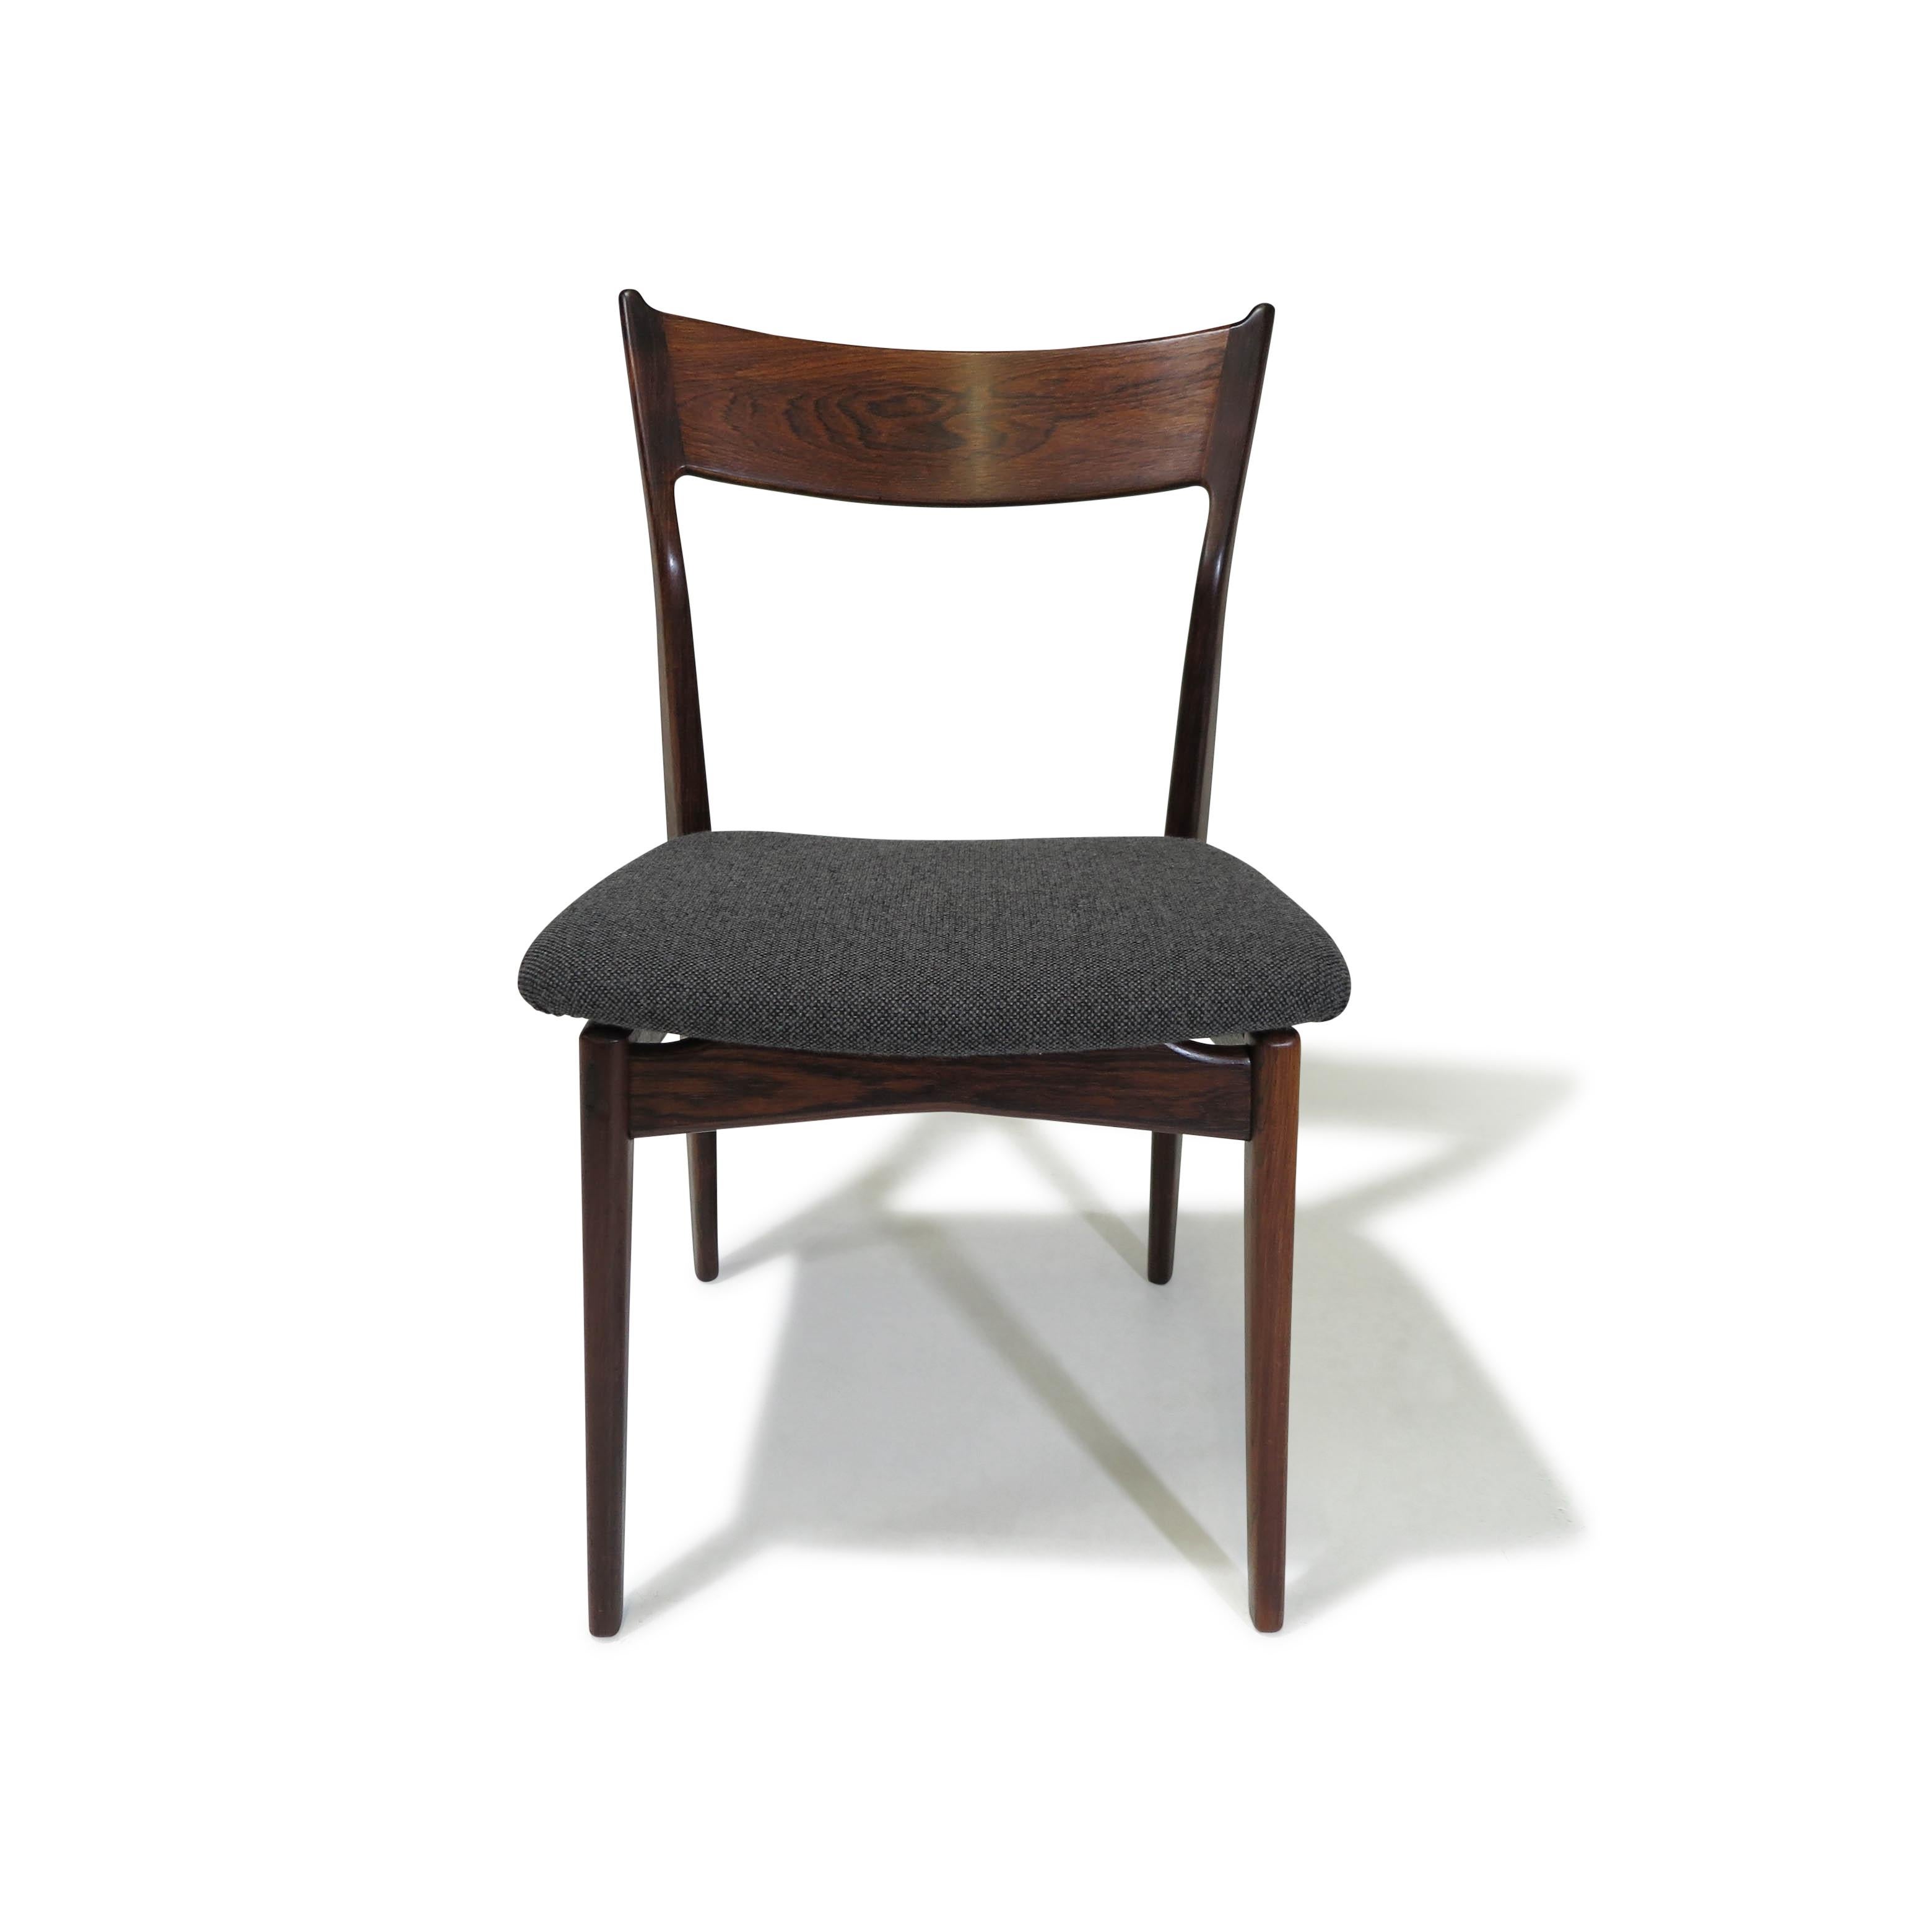 Midcentury Brazilian rosewood dining chairs designed by H.P. Hansen for Randers Møbelfabrik. Handcrafted from solid Brazilian rosewood, these chairs feature sculpted backrests. The frames showcase the finest rosewood, characterized by its dark